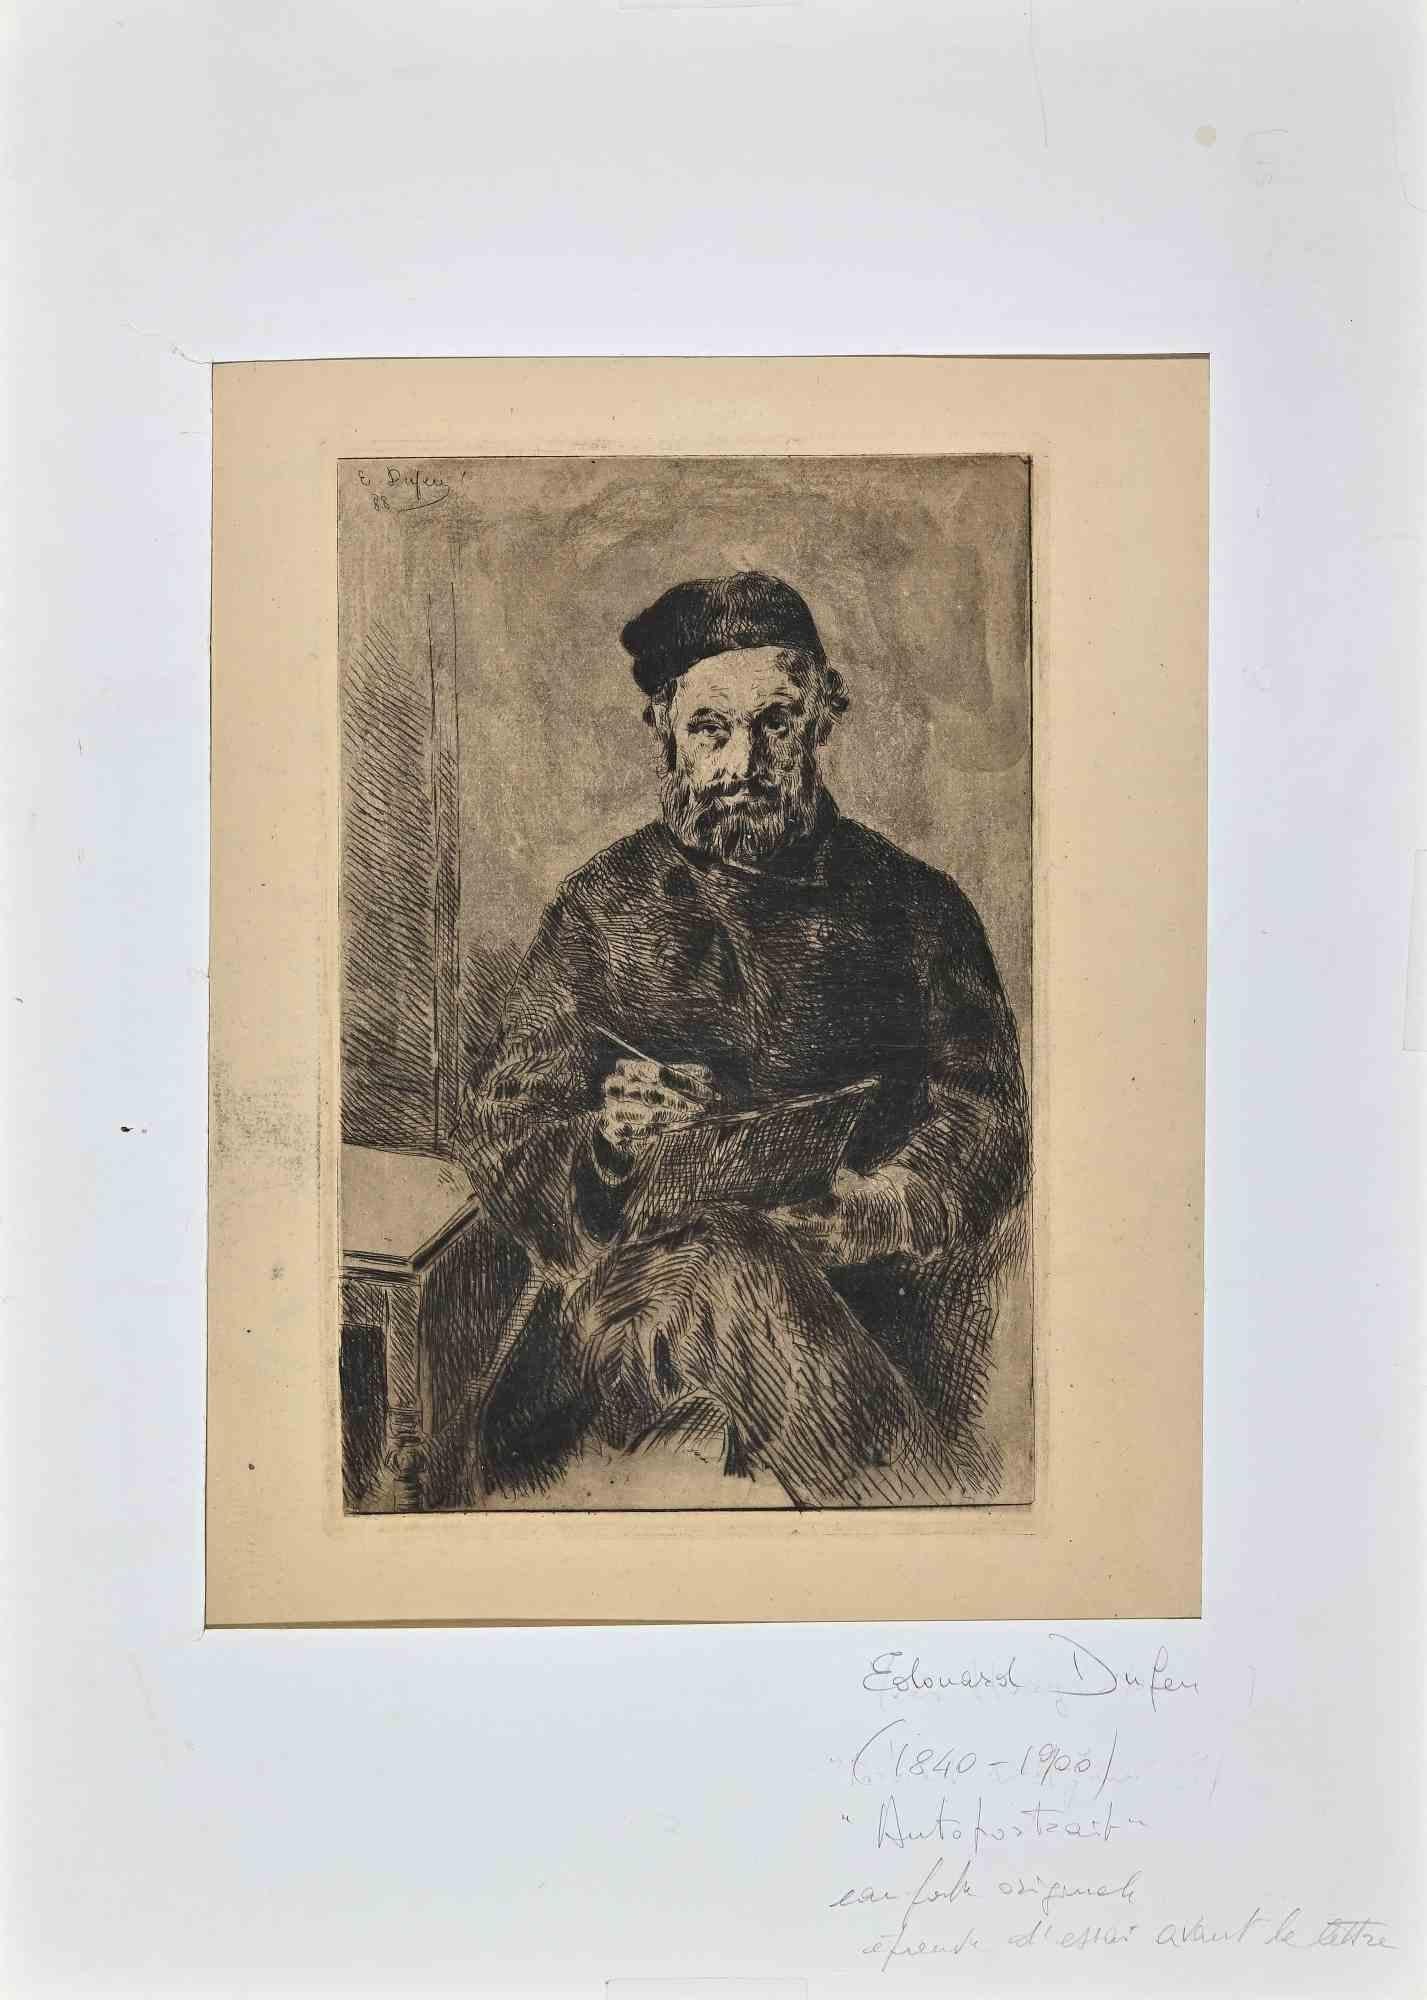 Self-Portrait is an etching realized by Edouard Dufeu (1840-1900).

Proof artist.

Signed and dated on the upper left corner.

Edouard Jacques Dufeu , born in Marseilles on March 27 , 1836, and died in Grasse on December 1 , 1900, is a French